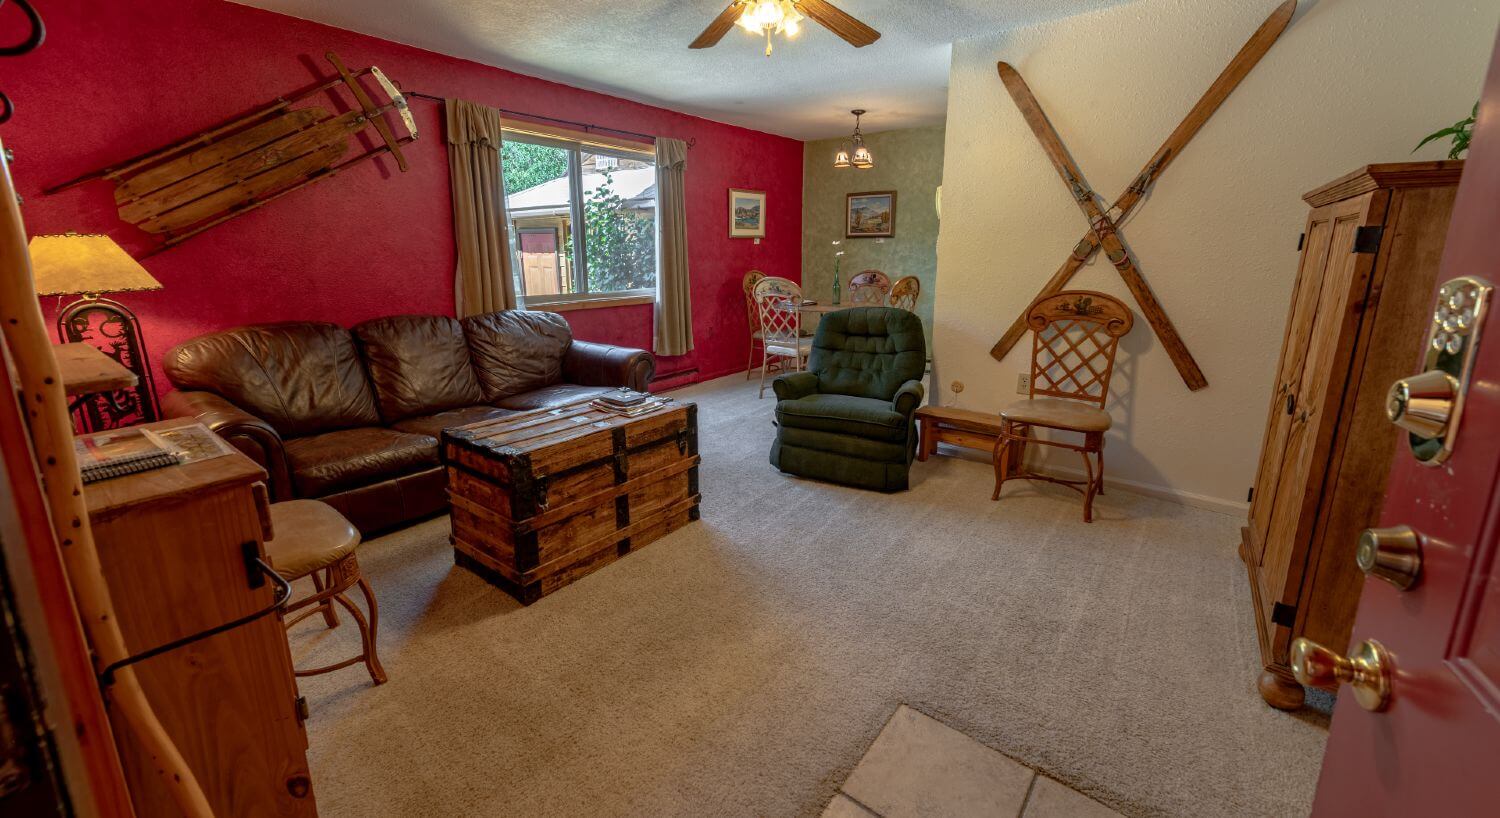 Living room with red walls, antique skis and sled attached to wall, chairs, leather sofa, light colored carpet.